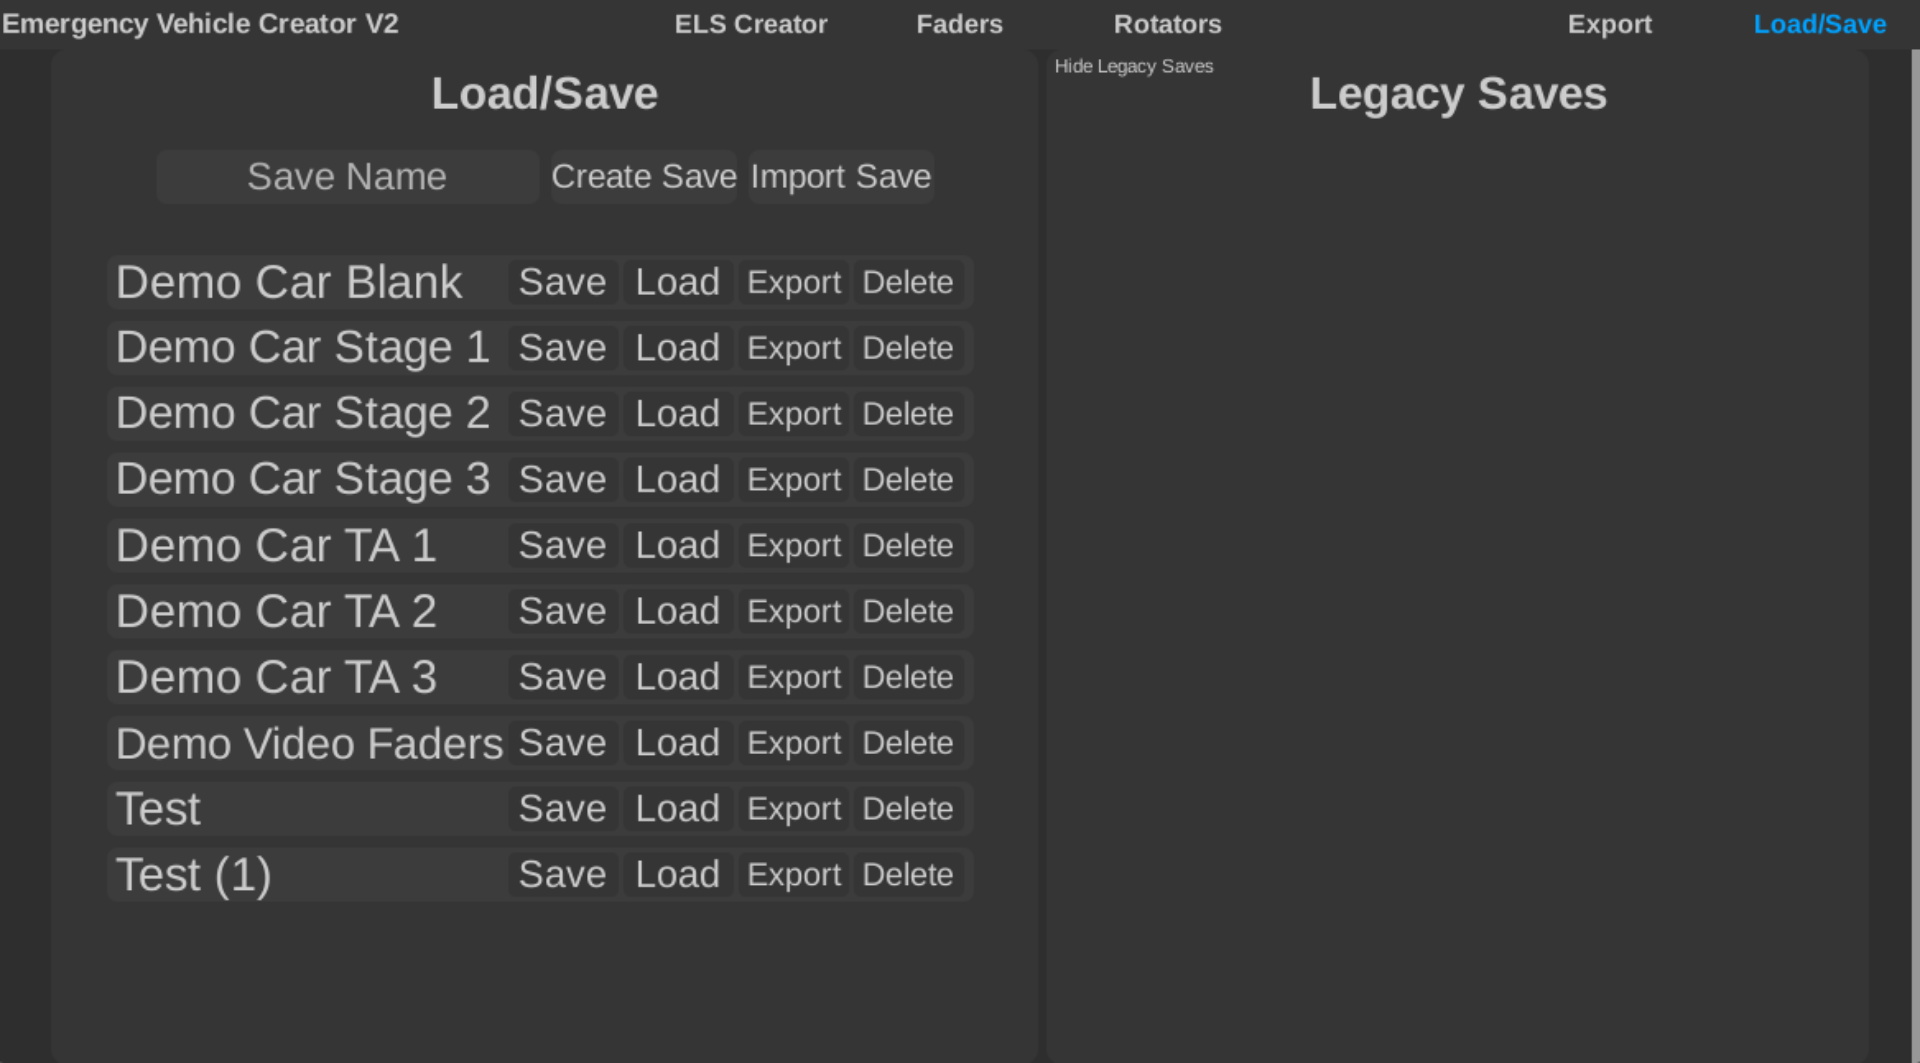 Save/Load Overview